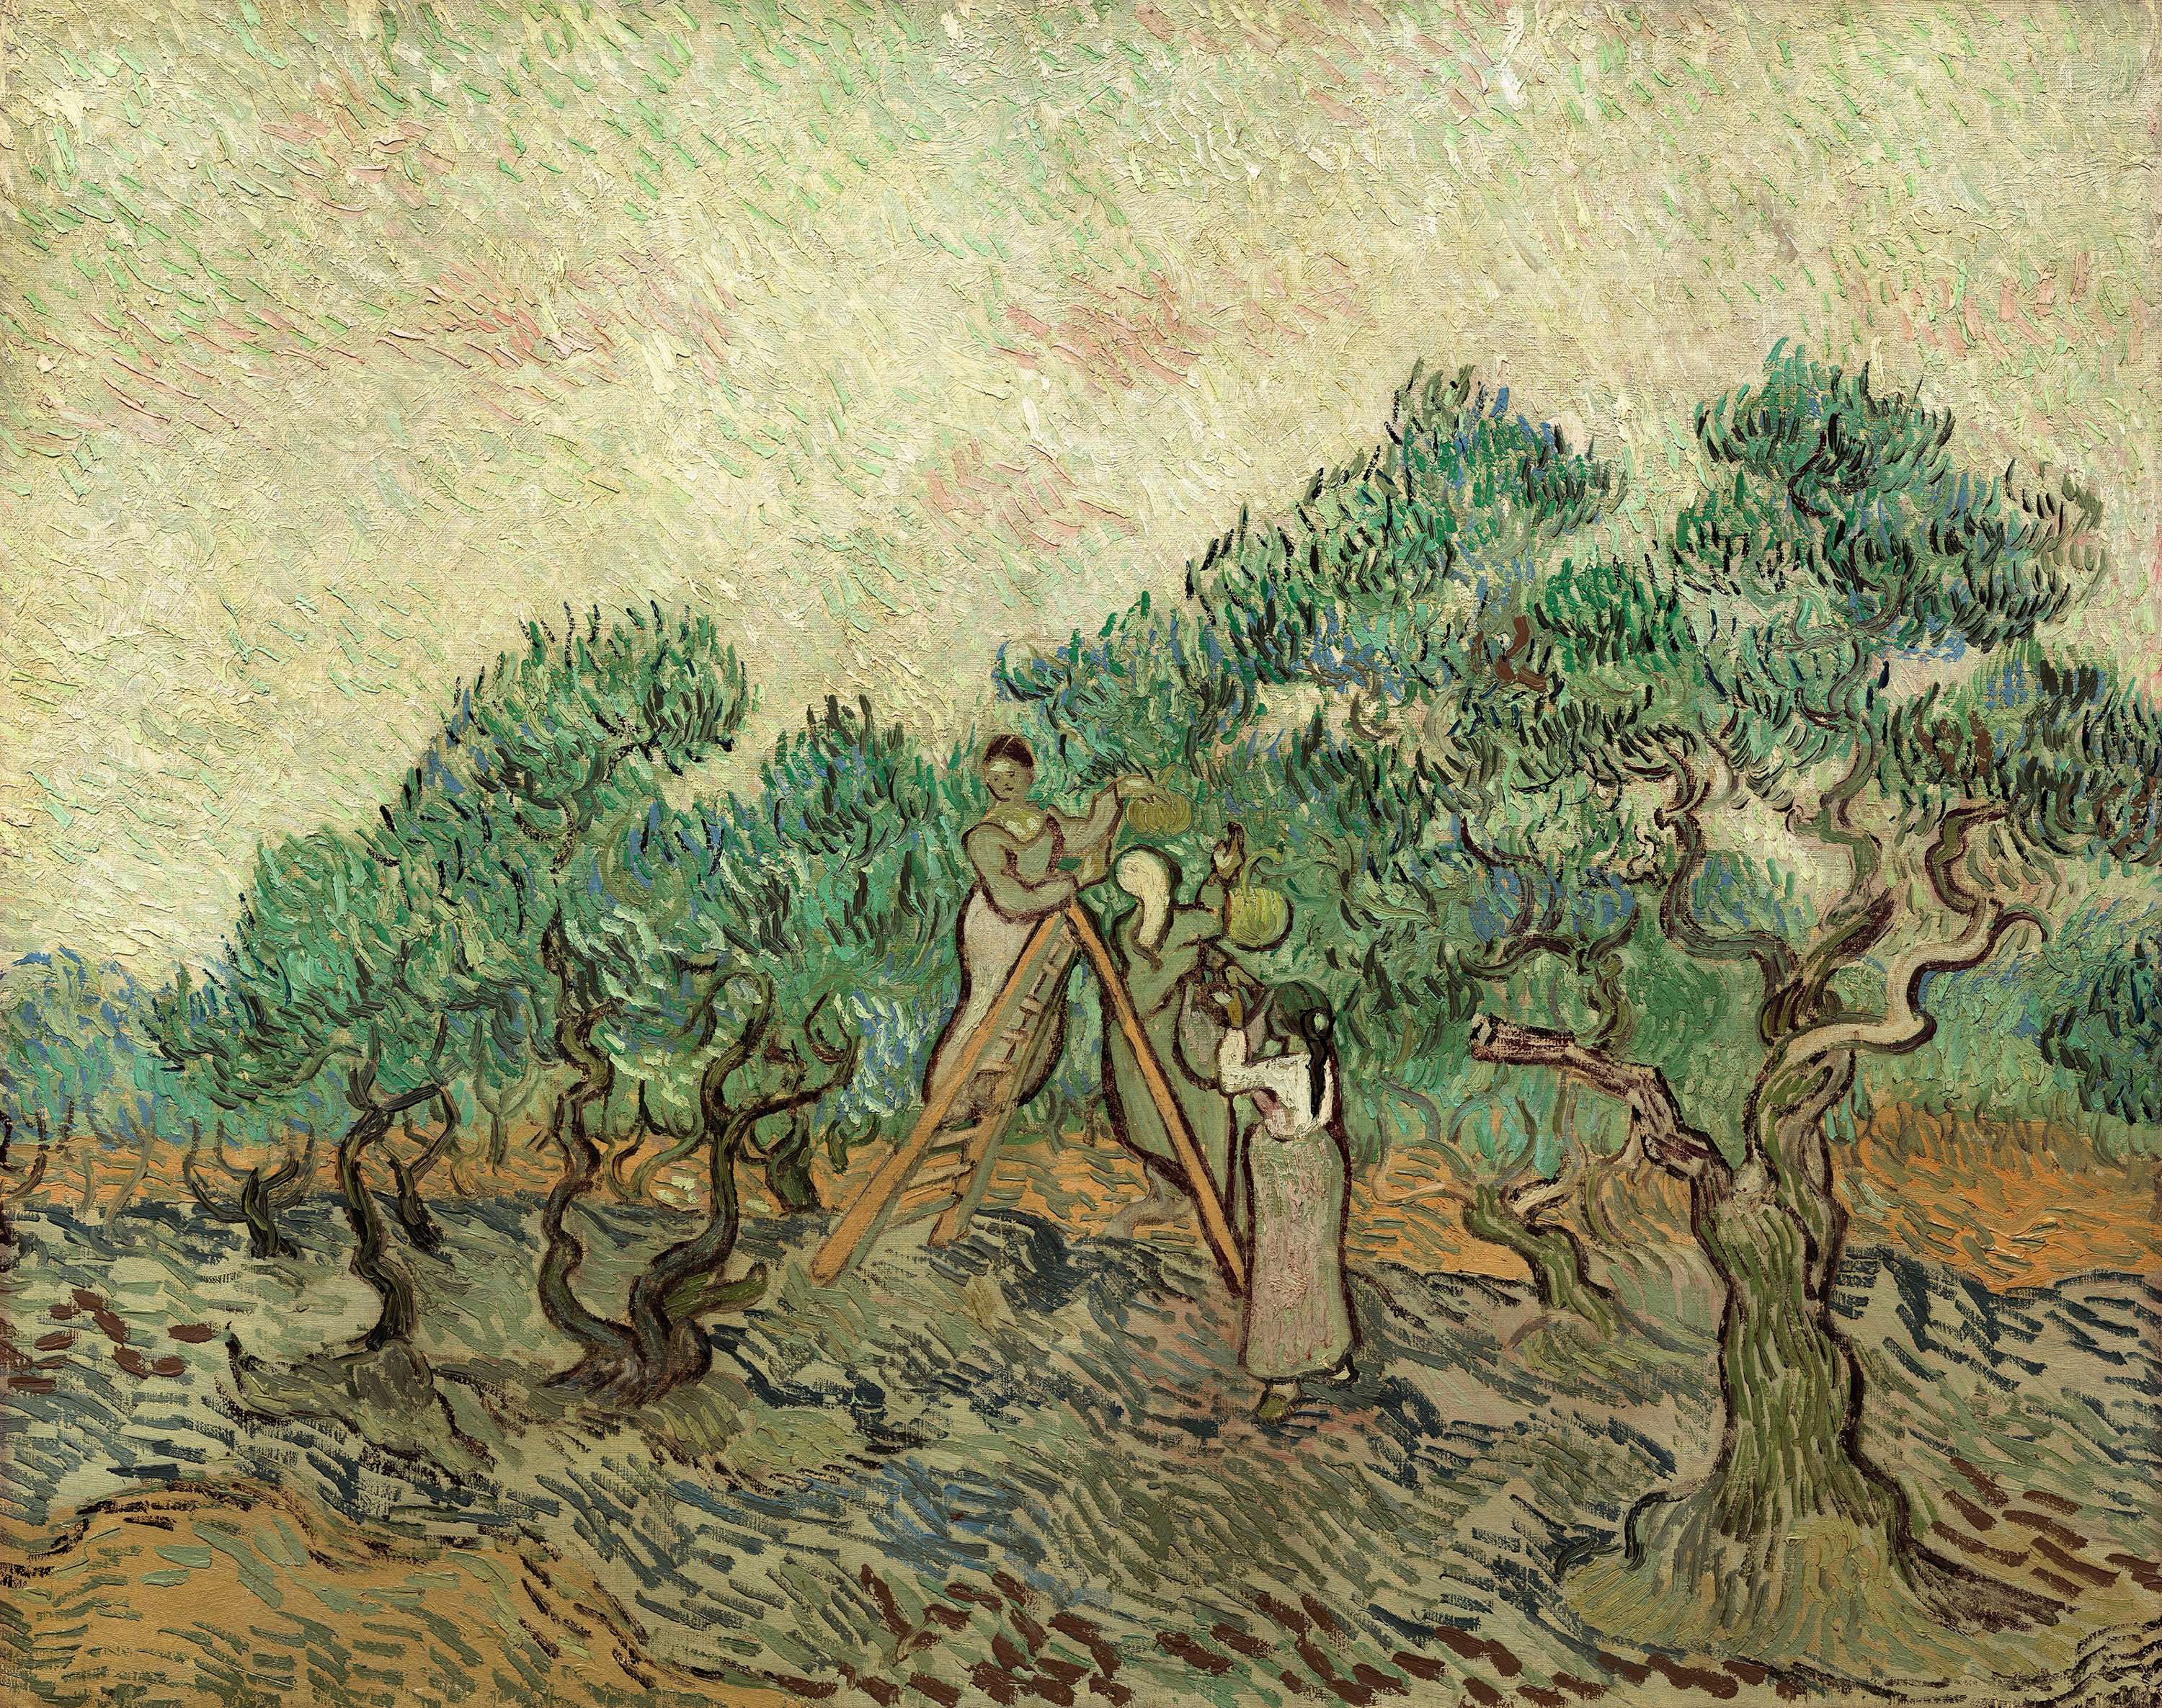 Own a Van Gogh … in Animal Crossing, with The Met's New Share Tool